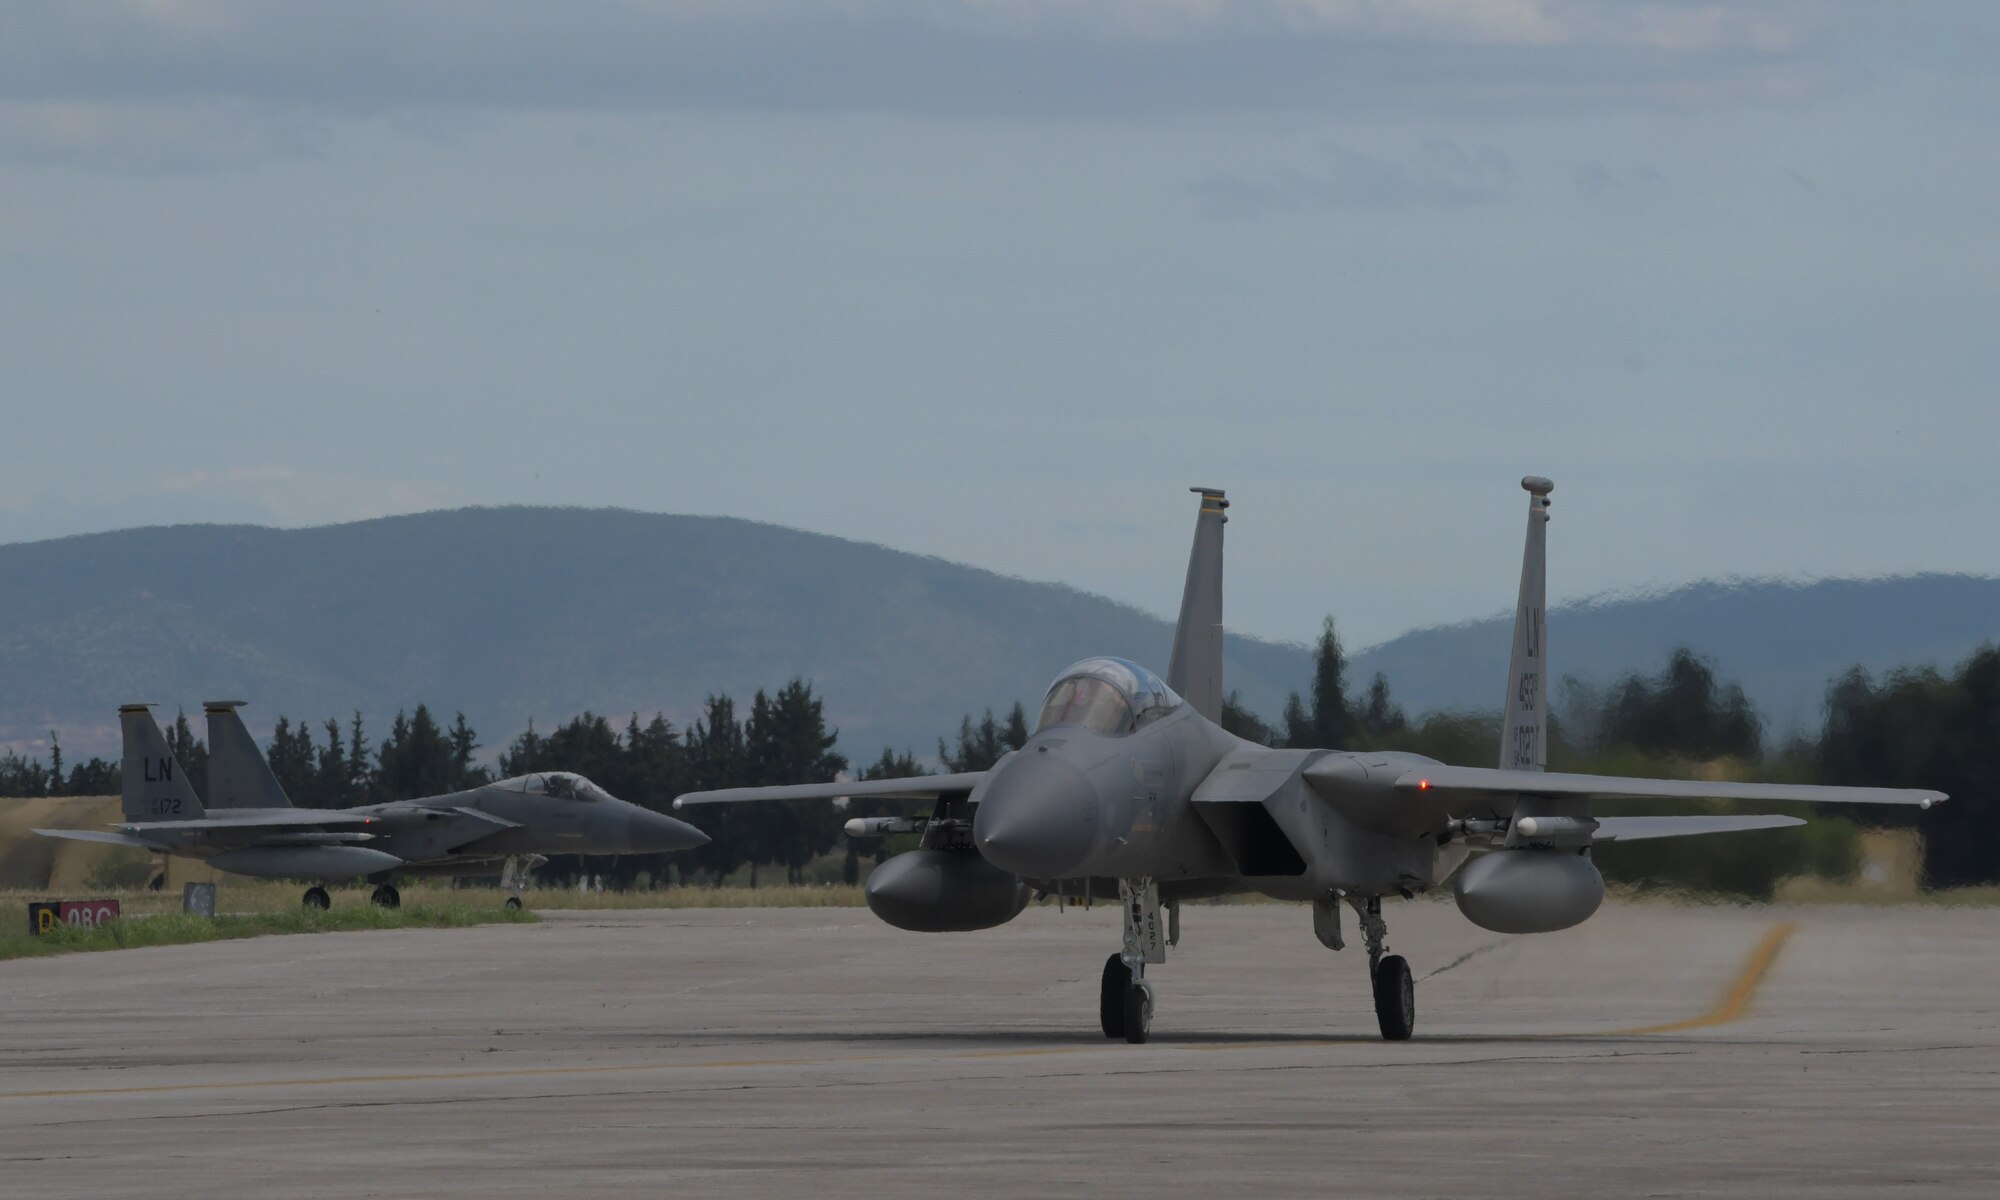 Two U.S. Air Force F-15C Eagles assigned to the 493th Fighter Squadron taxi after a sortie during exercise Astral Knight 21 at Larissa Air Base, Greece, May 20, 2021. The 48th Fighter Wing trained with military forces from Albania, Croatia, Greece, Italy, and Slovenia as well as U.S. units from around European Command enhancing the readiness, strength and cohesion of these alliances. (U.S. Air Force photo by Tech. Sgt. Alex Fox Echols III)